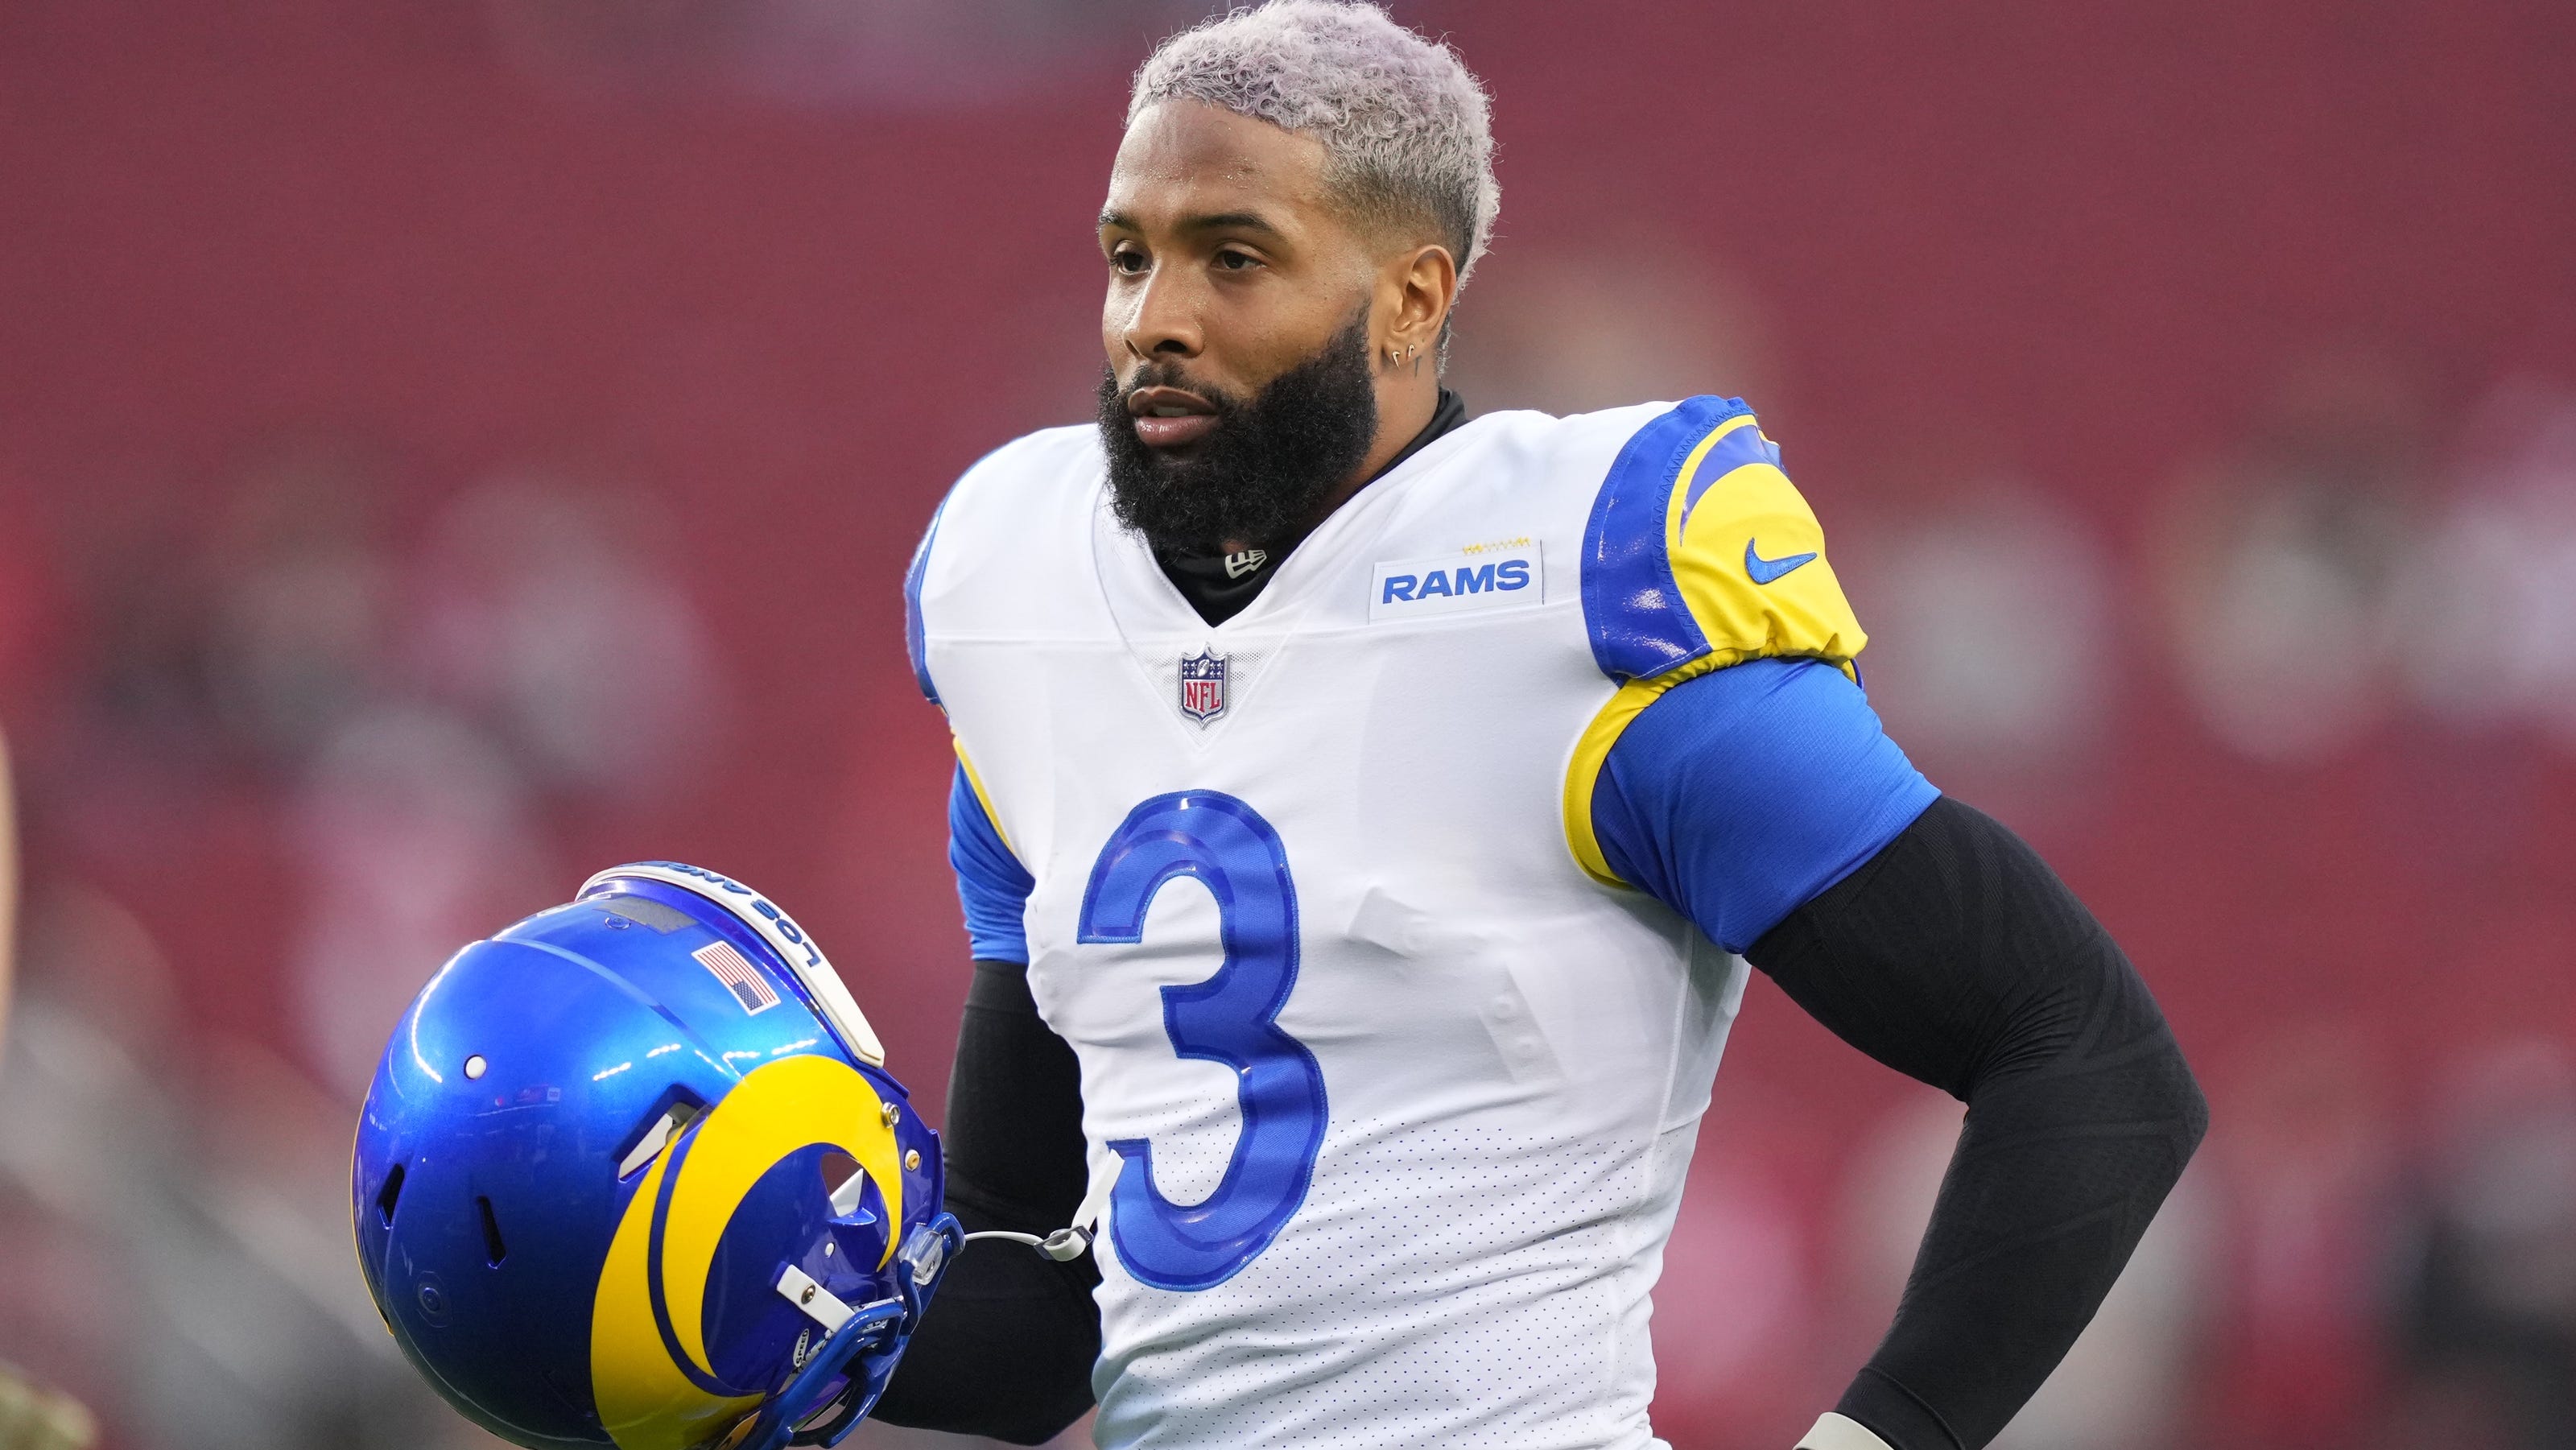 Odell Beckham powers Rams dominant night over the Cardinals